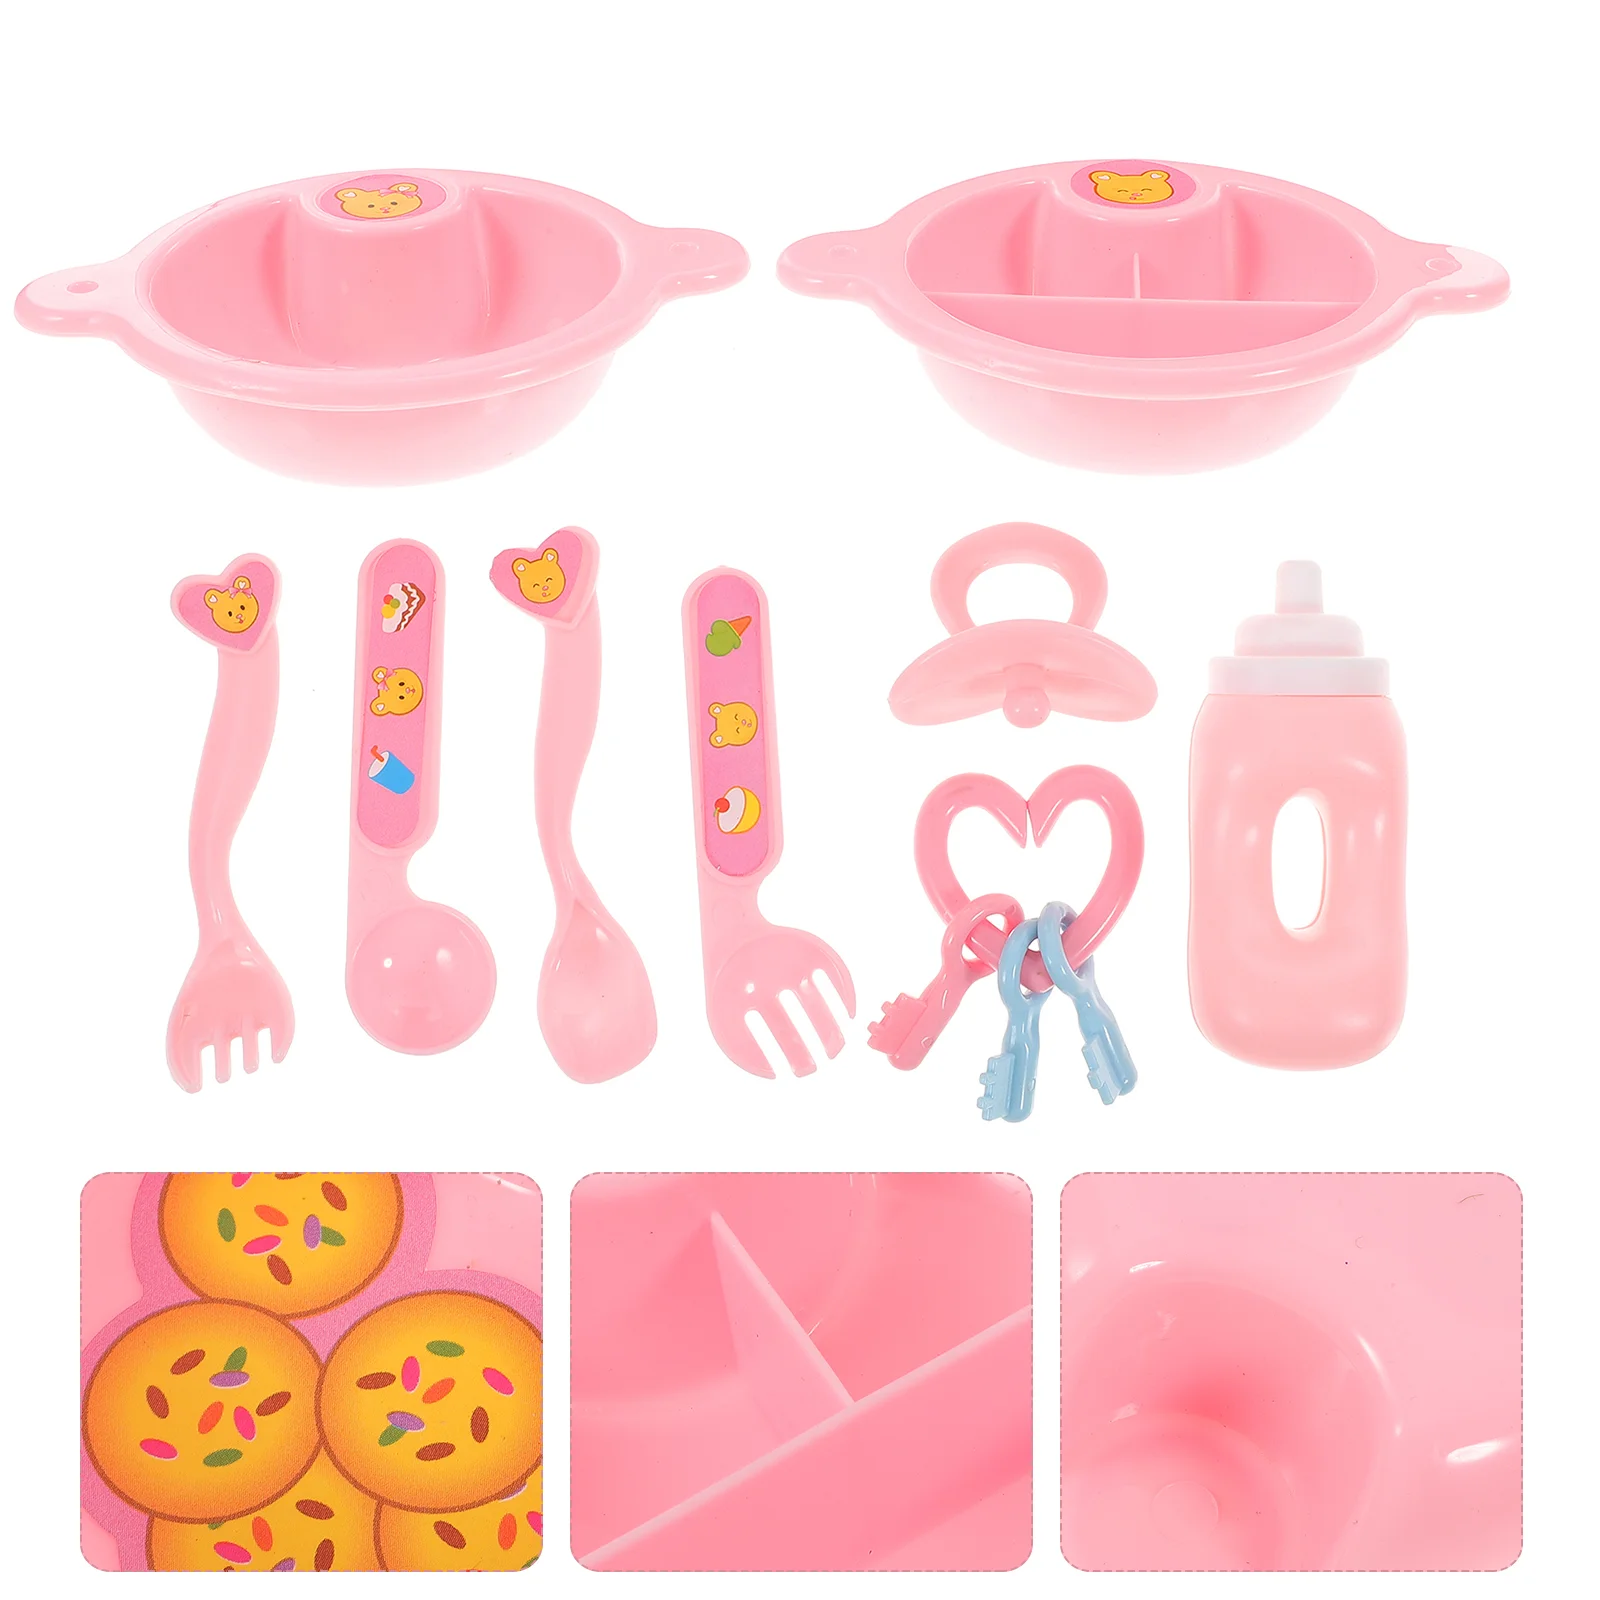 

Baby Feeding Set Toy Play Accessories Pretend Kitchen Tableware Kids Playsettoys Simulation Chair Care High Bottle Reborn Dishes